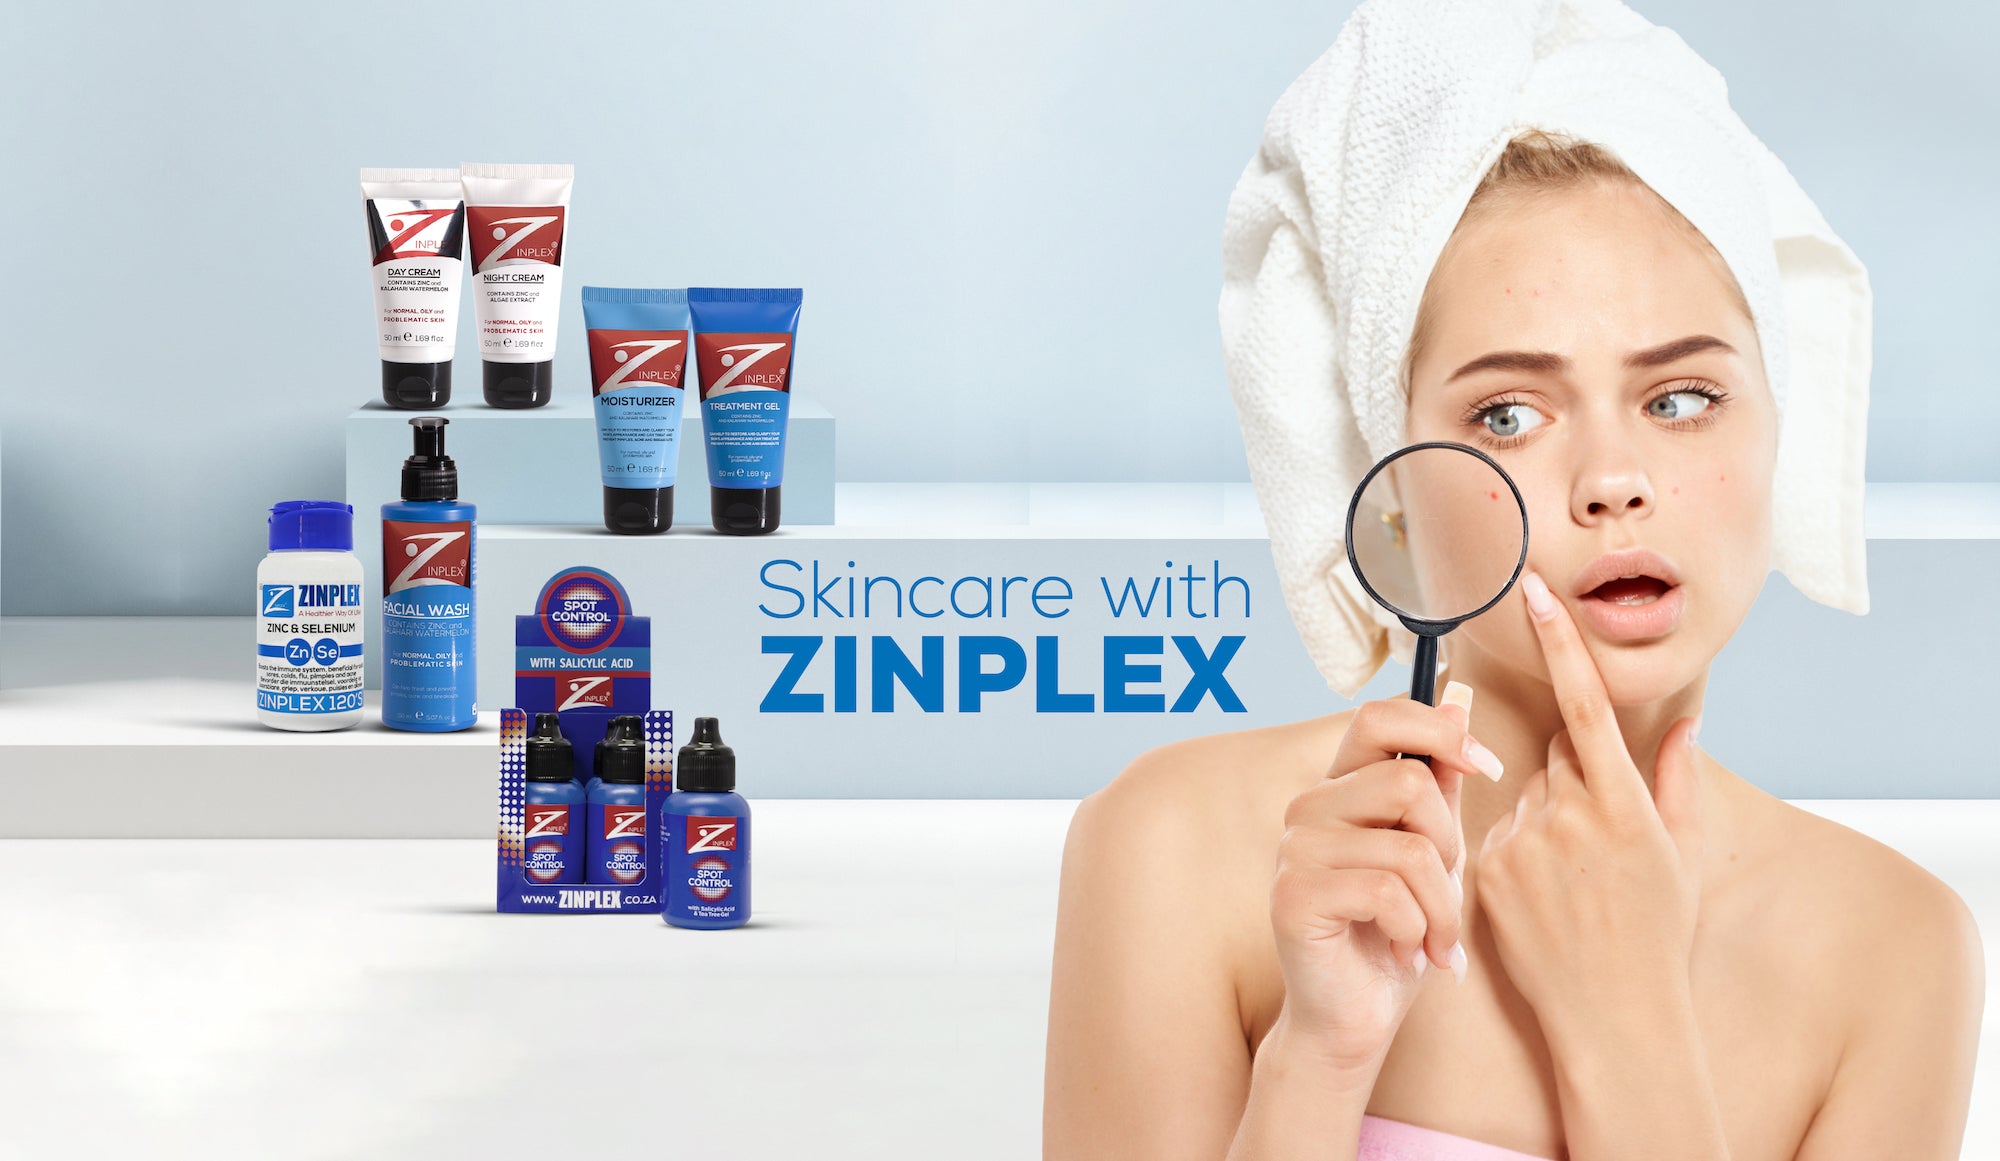 How To Use Zinplex Skin Care Products – Zinplex South Africa